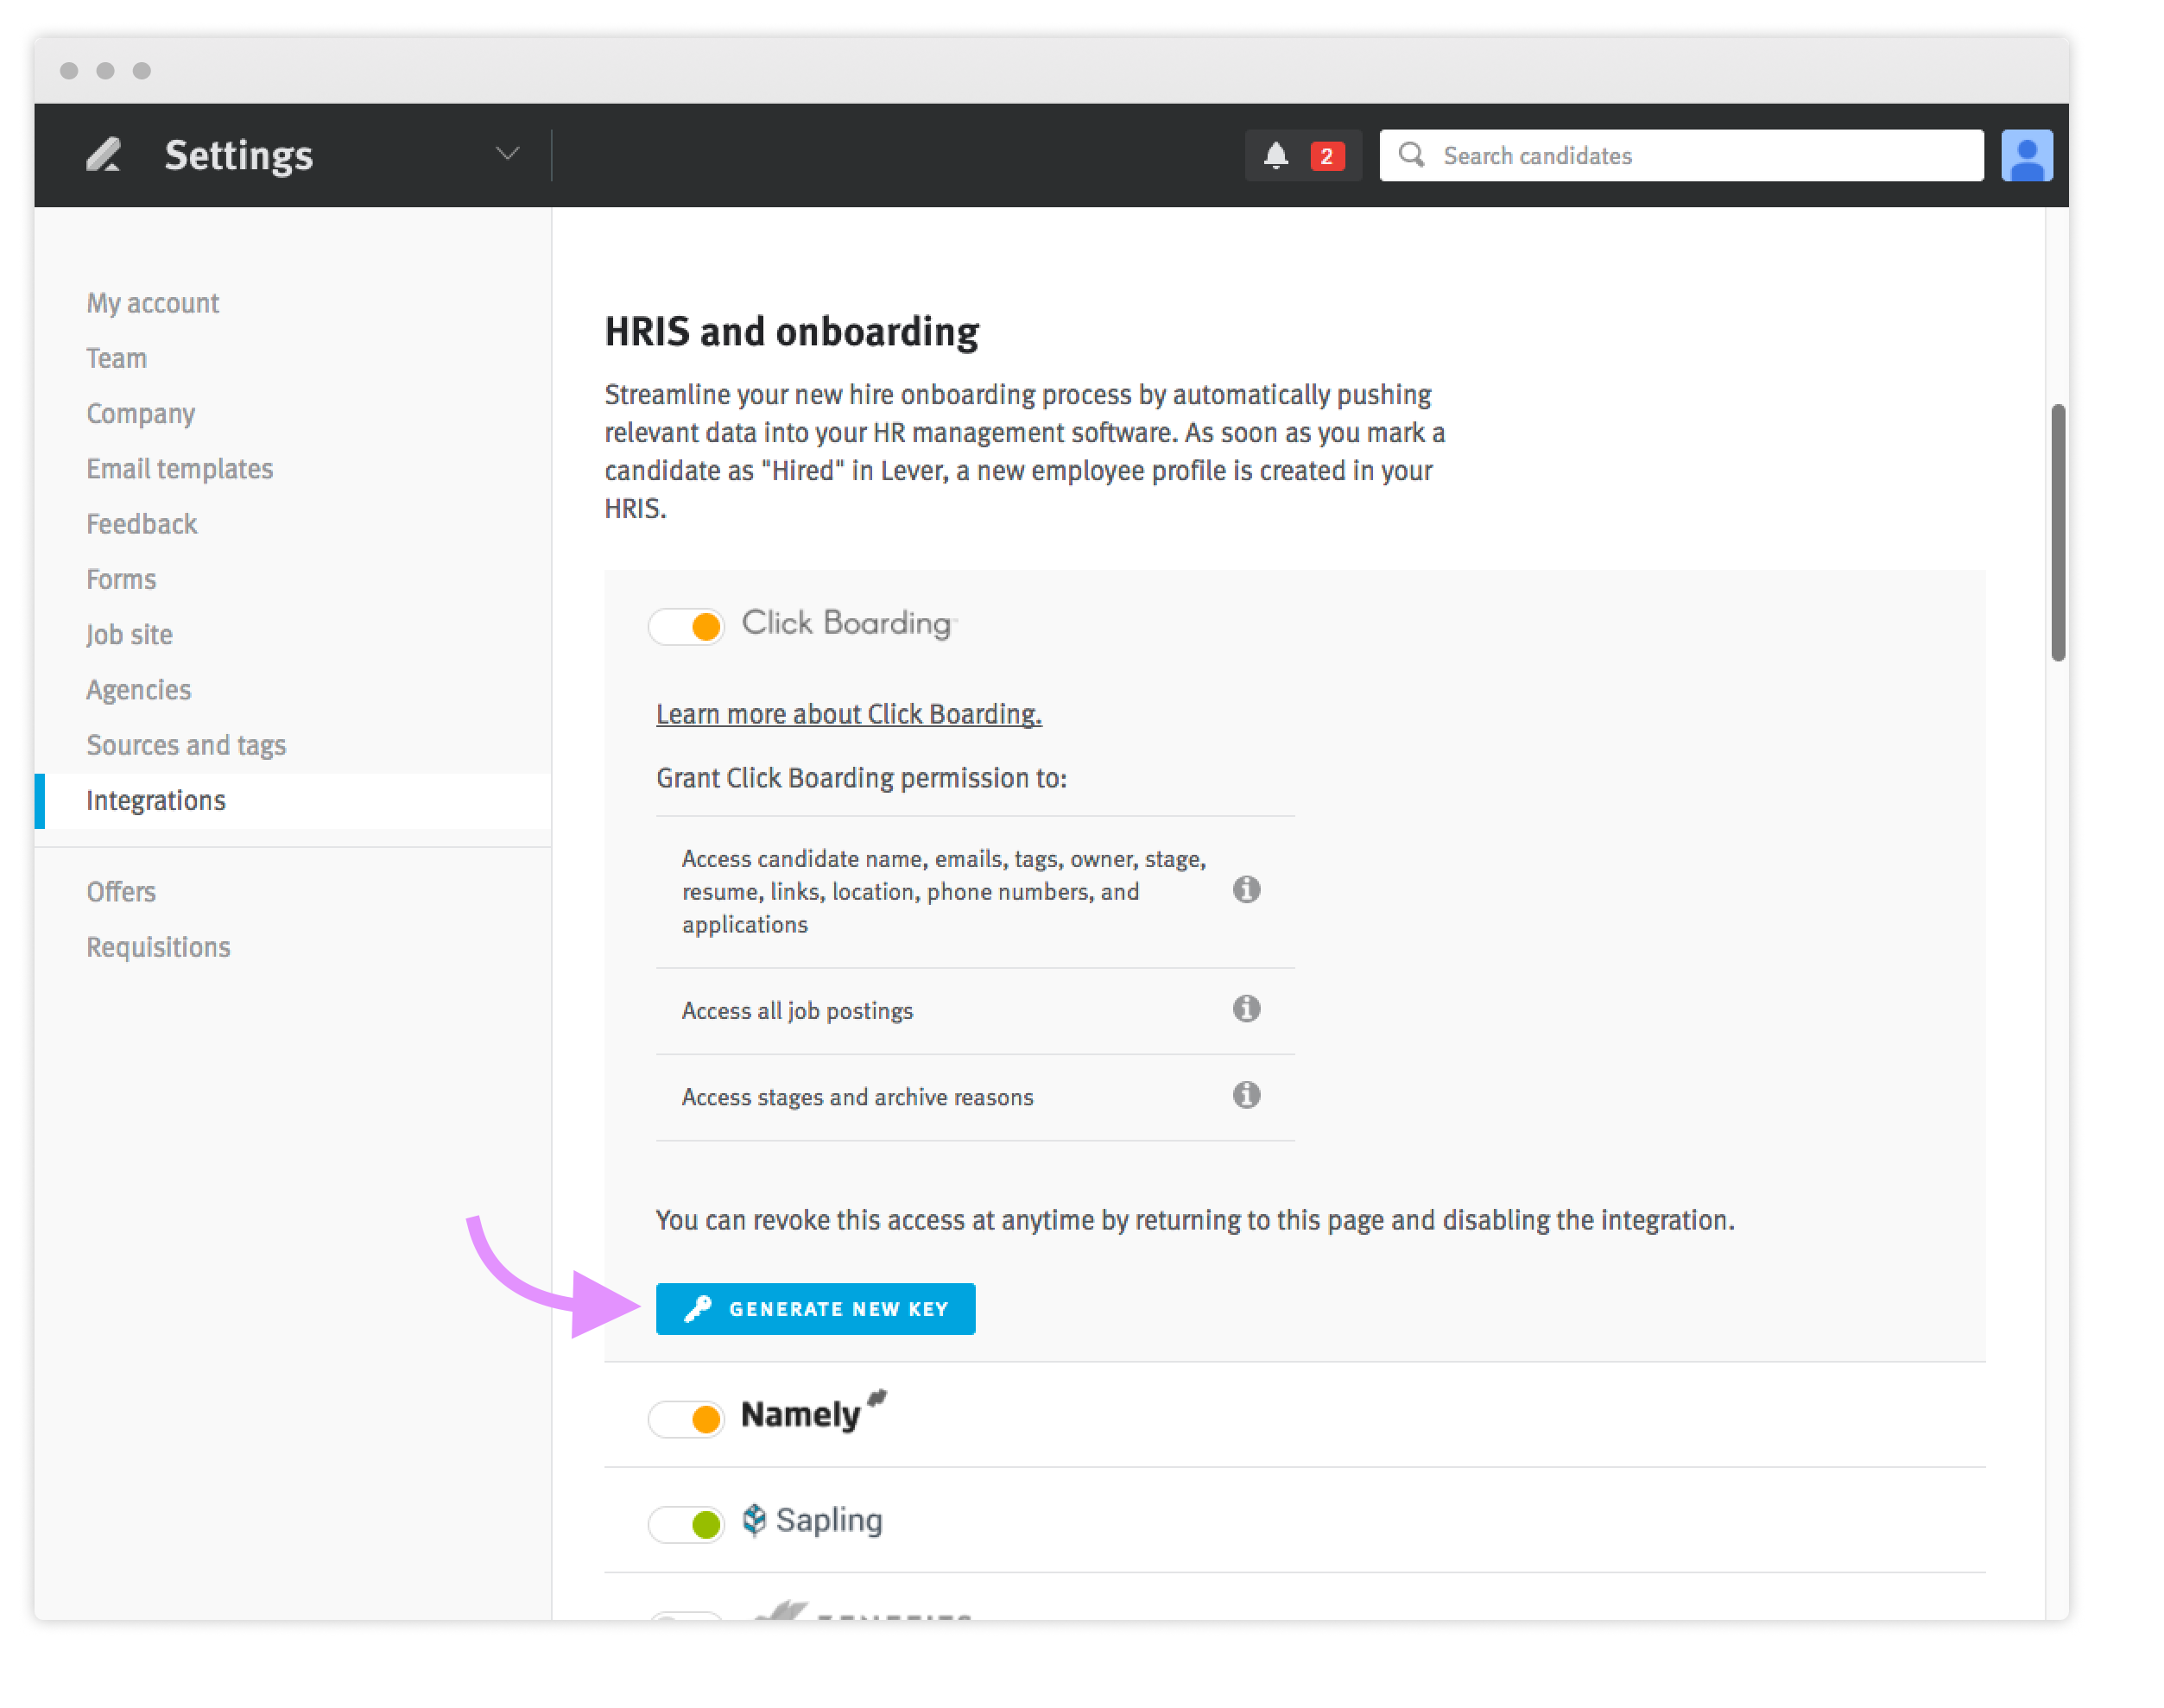 Lever integrations settings page with arrow pointing to generate new key button in the HRIS and onboarding section